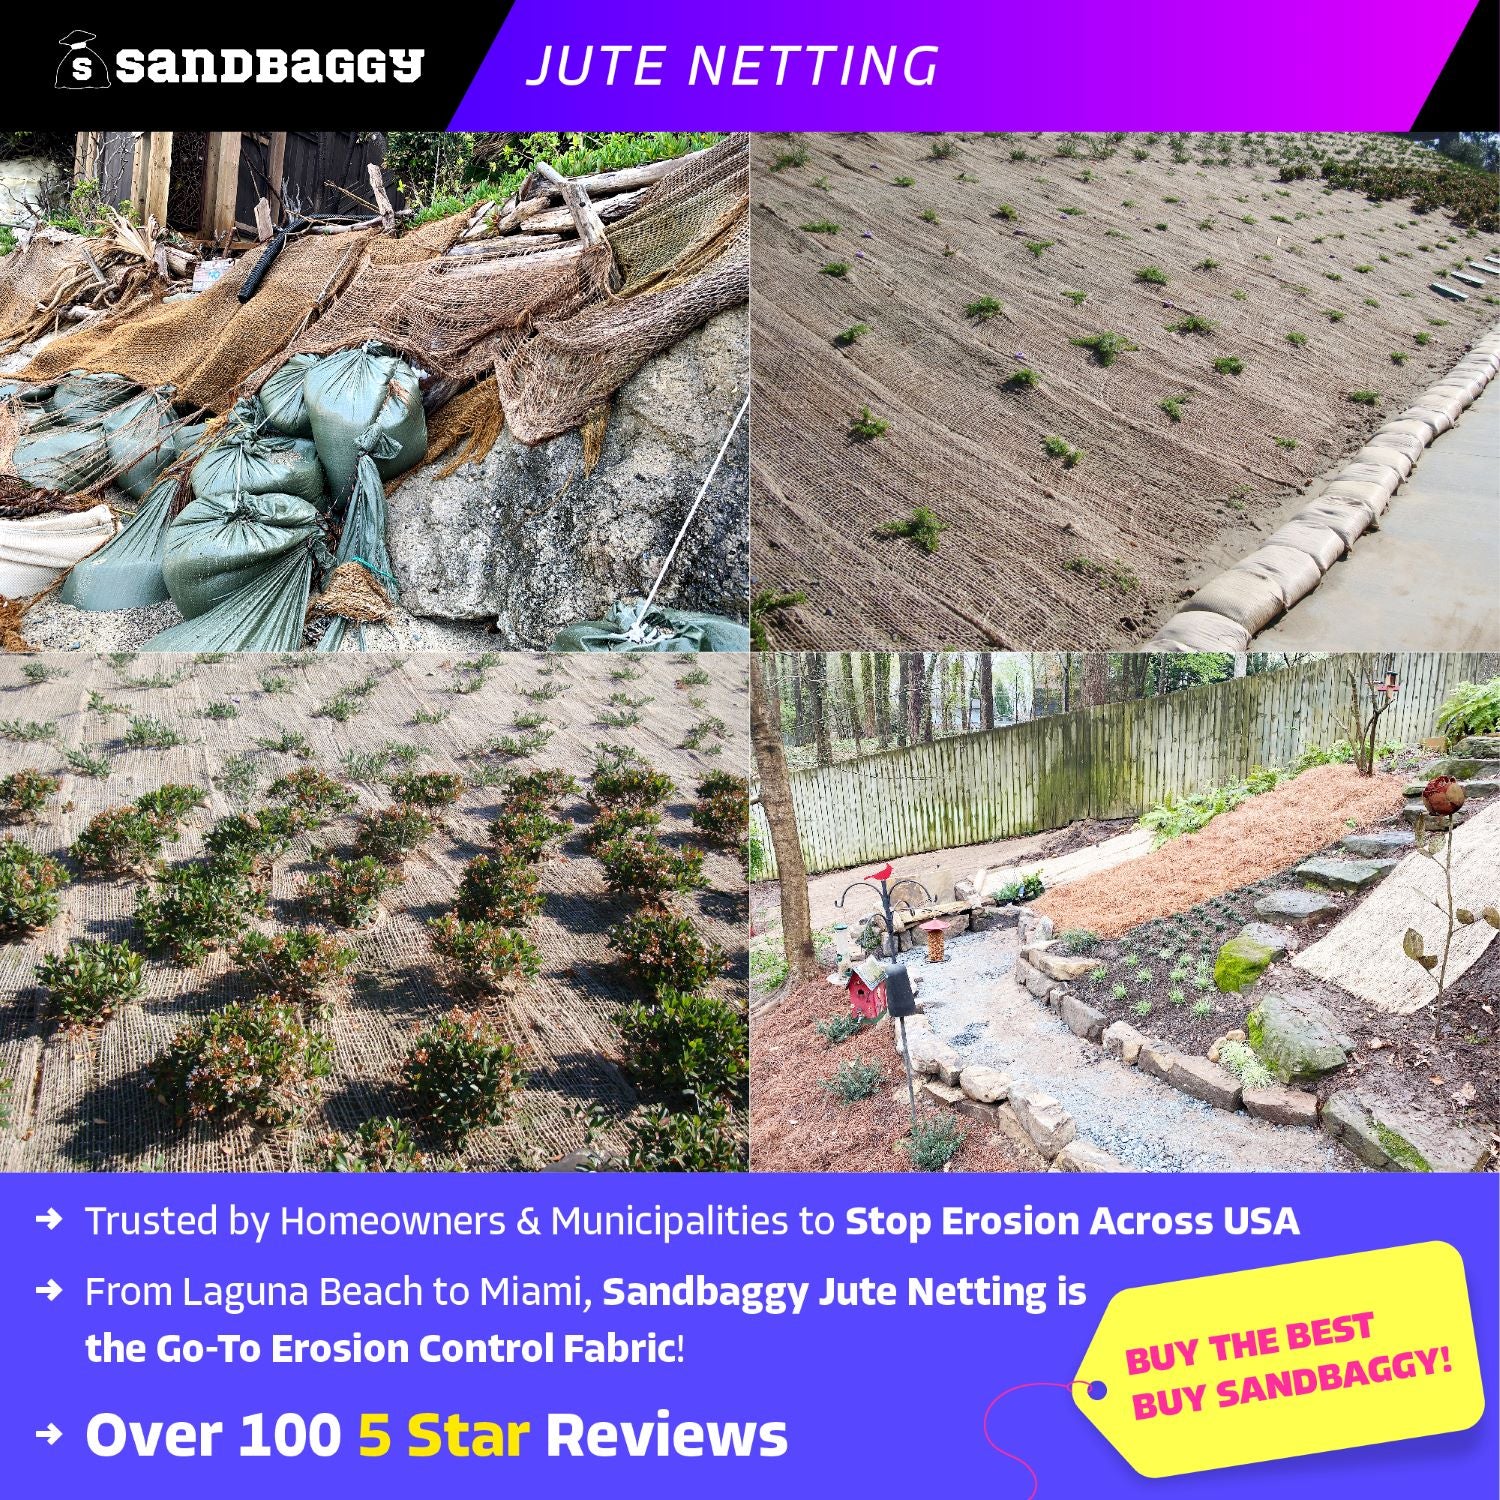 Searching TILL high yielding jute is unearthed - Research Outreach